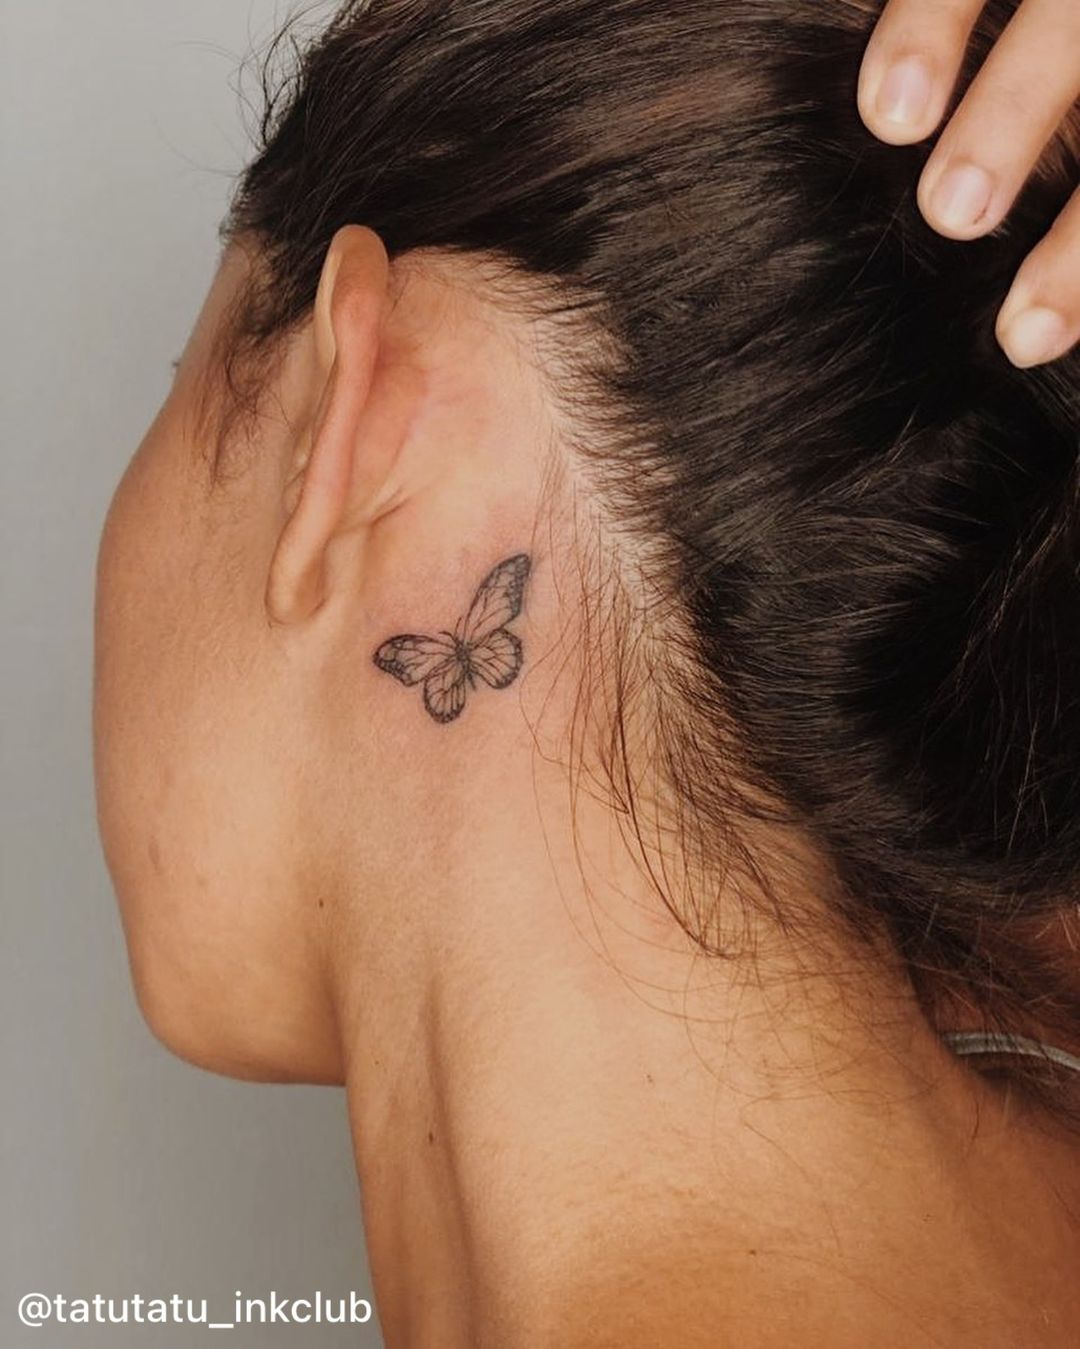 30+ Best Butterfly Tattoos Design You’ll Love To Get Next. Butterfly Tattoo Behind Ear